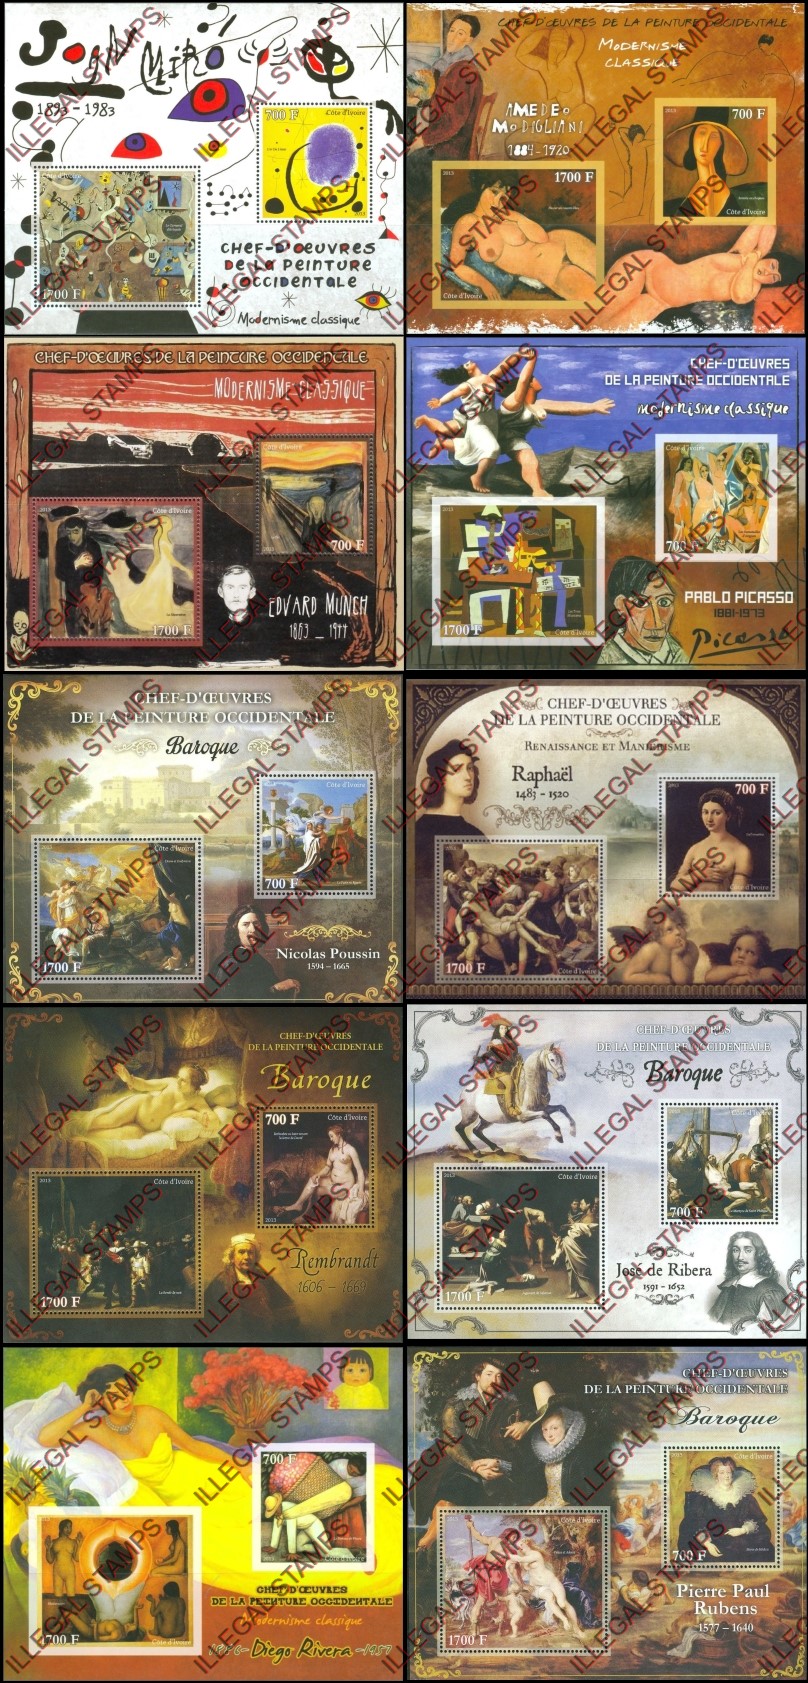 Ivory Coast 2013 Art Impressionism Paintings Illegal Stamp Souvenir Sheets of 2 (part 6)